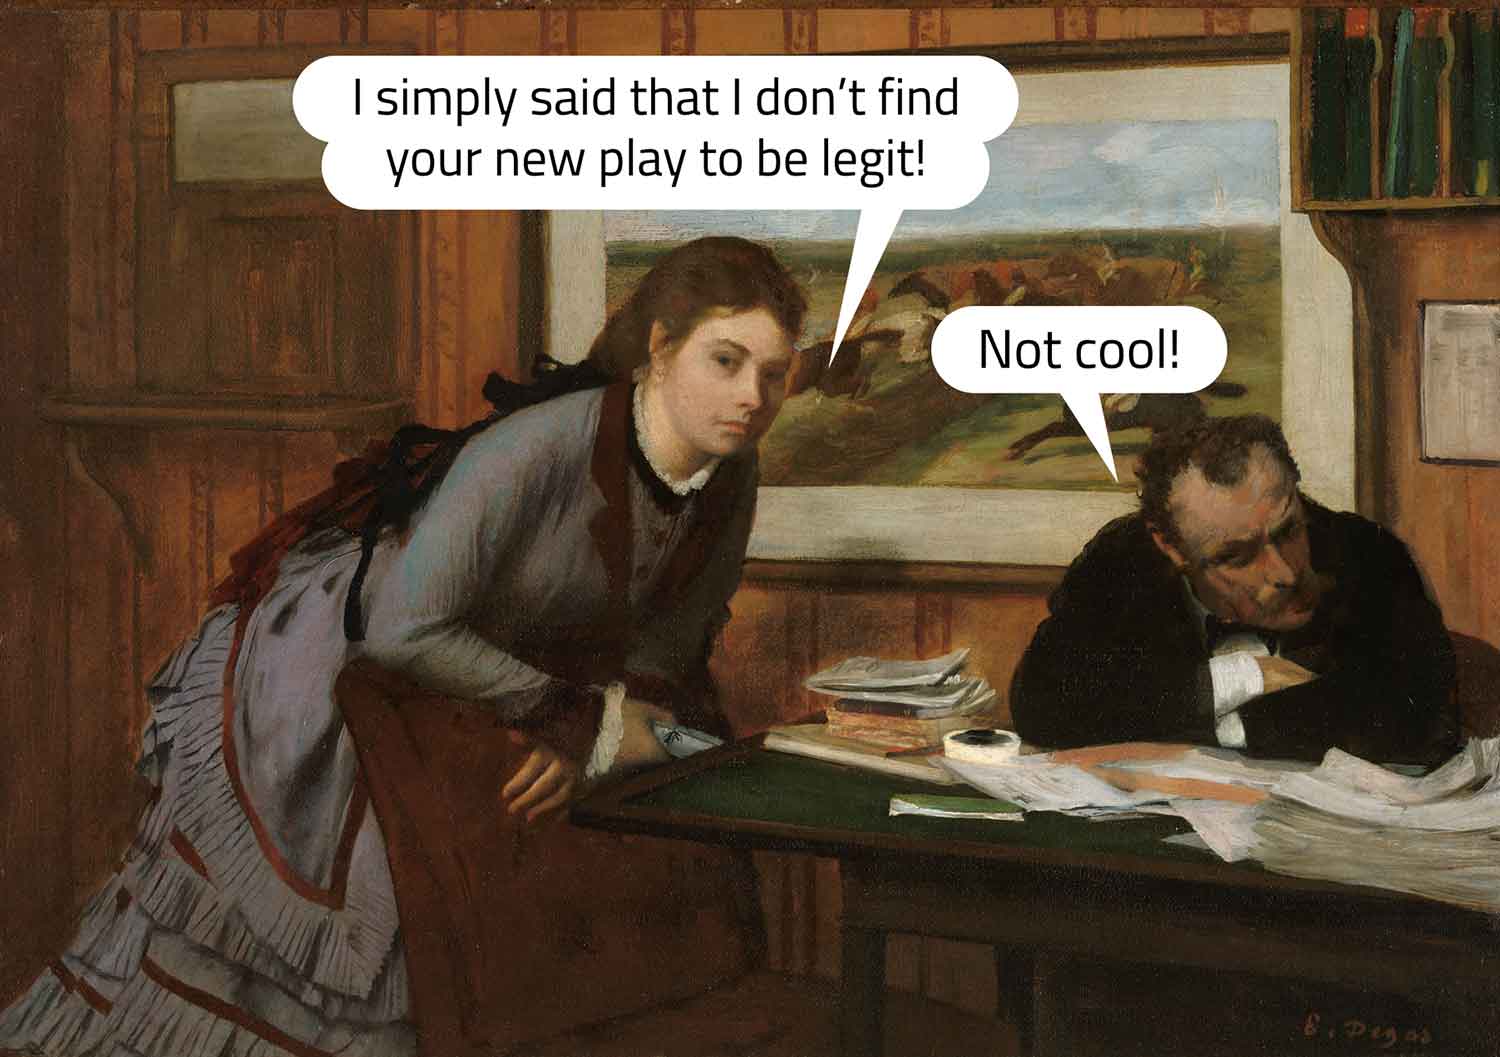 A painting shows a 19th century woman leaning on a chair with a talk bubble in which she uses the word “legit.” A man sits at the table and uses the word “cool.”